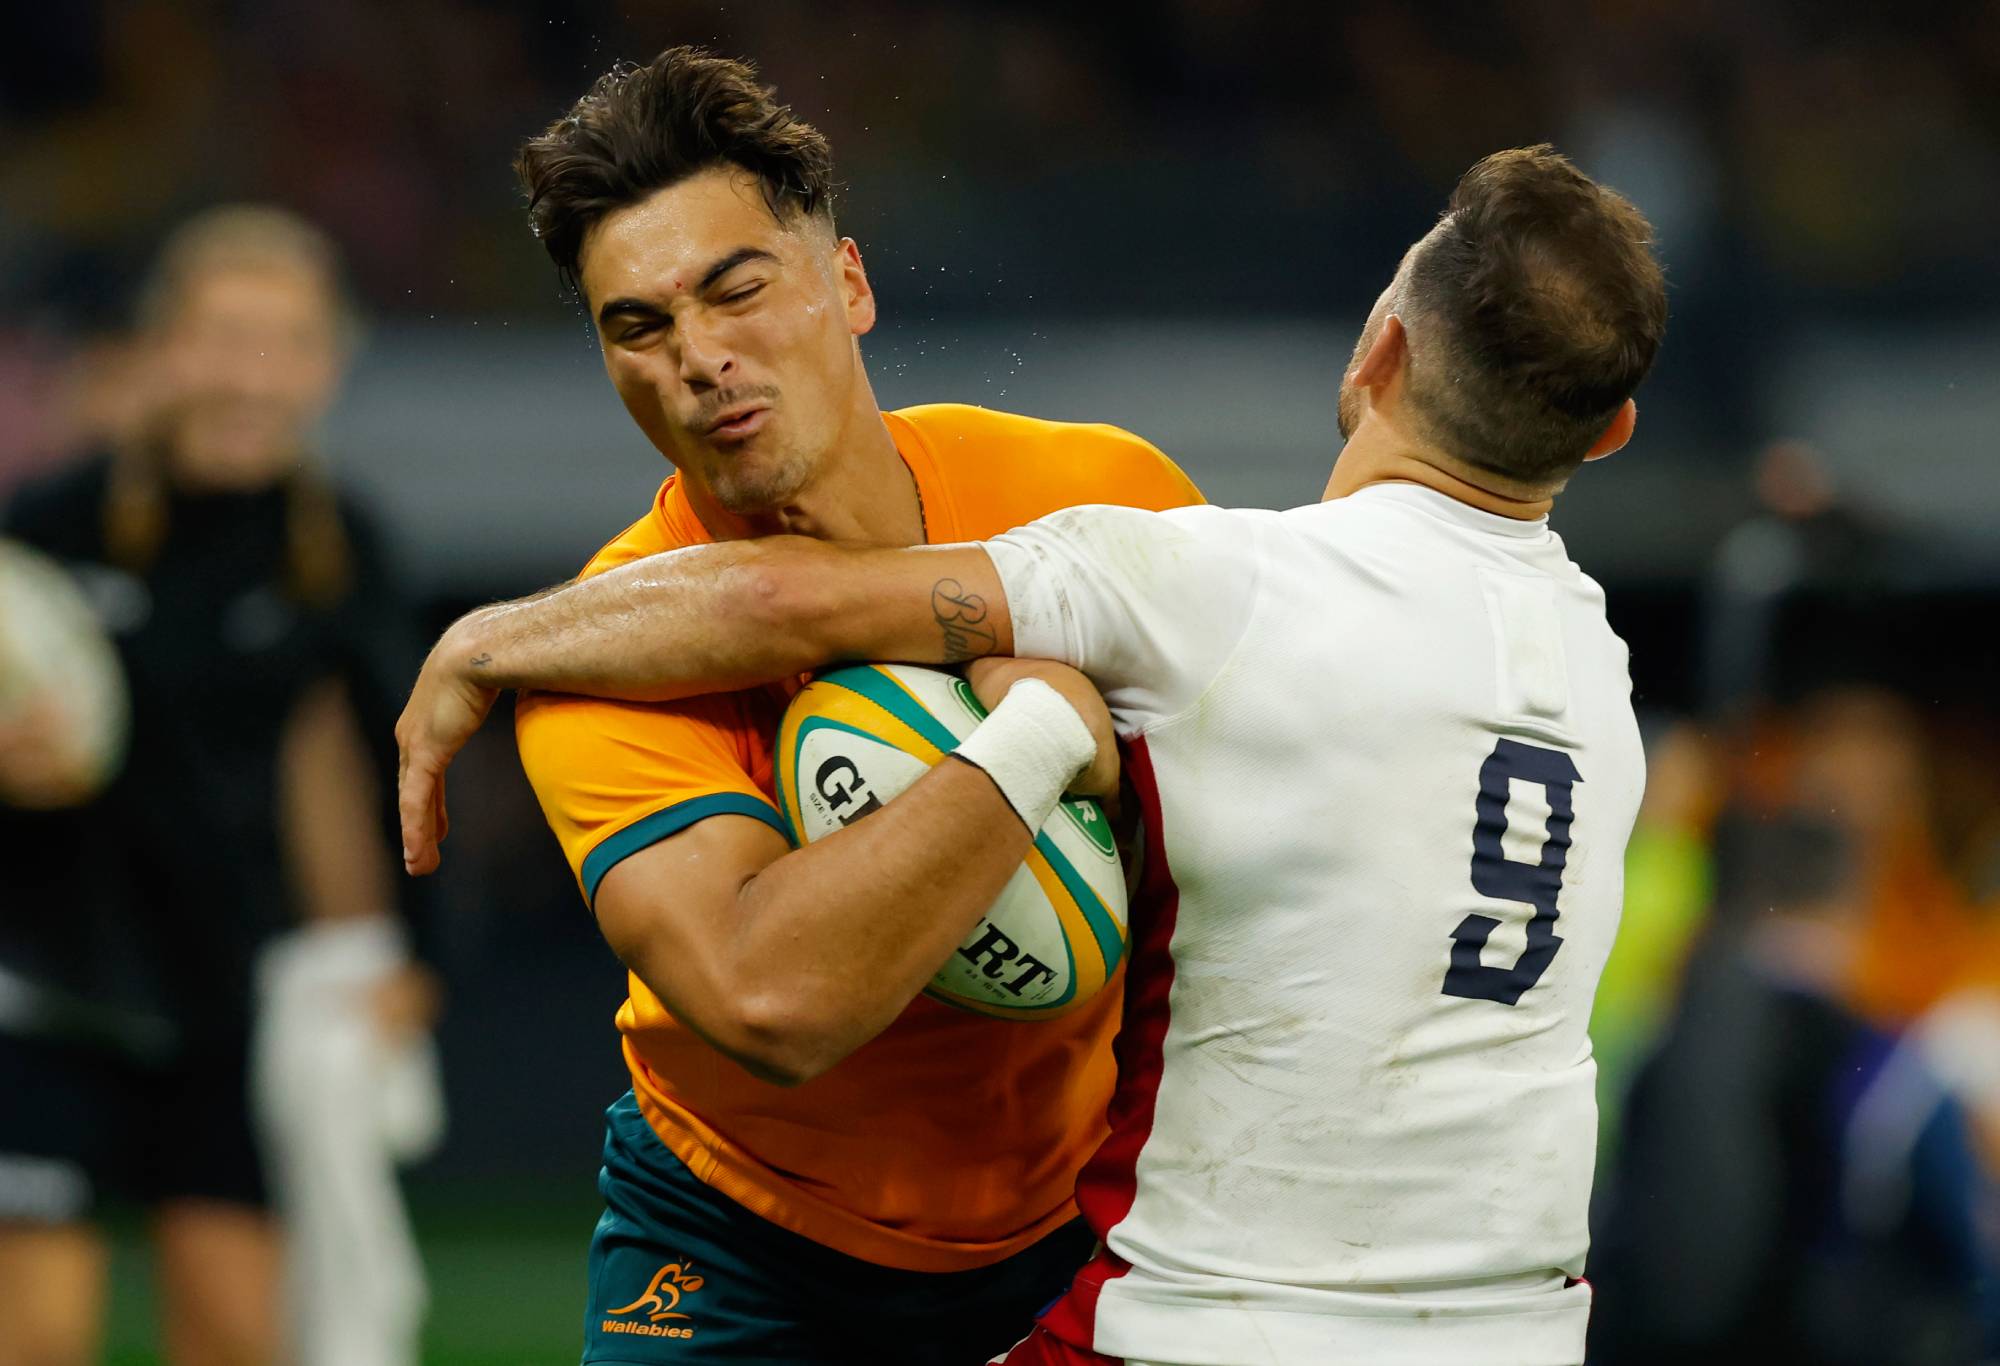 Jordan Petaia of the Wallabies attempts to break the tackle from Danny Care of England during game one of the international test match series between the Australian Wallabies and England at Optus Stadium on July 02, 2022 in Perth, Australia. (Photo by James Worsfold/Getty Images)